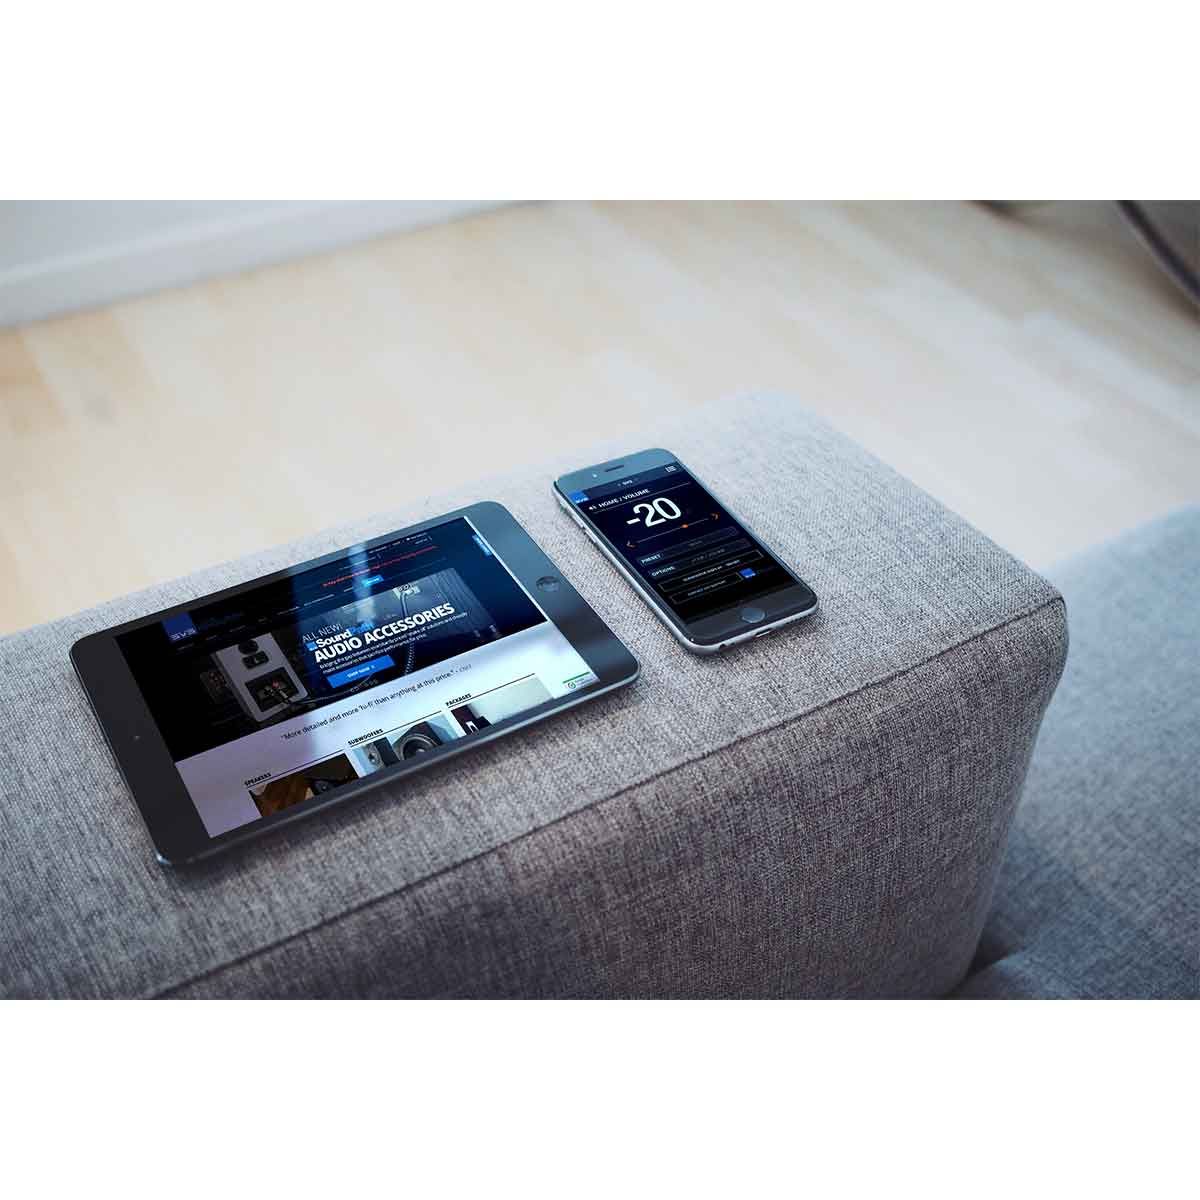 smartphone and tablet showing the new SVS Subwoofer Control App.